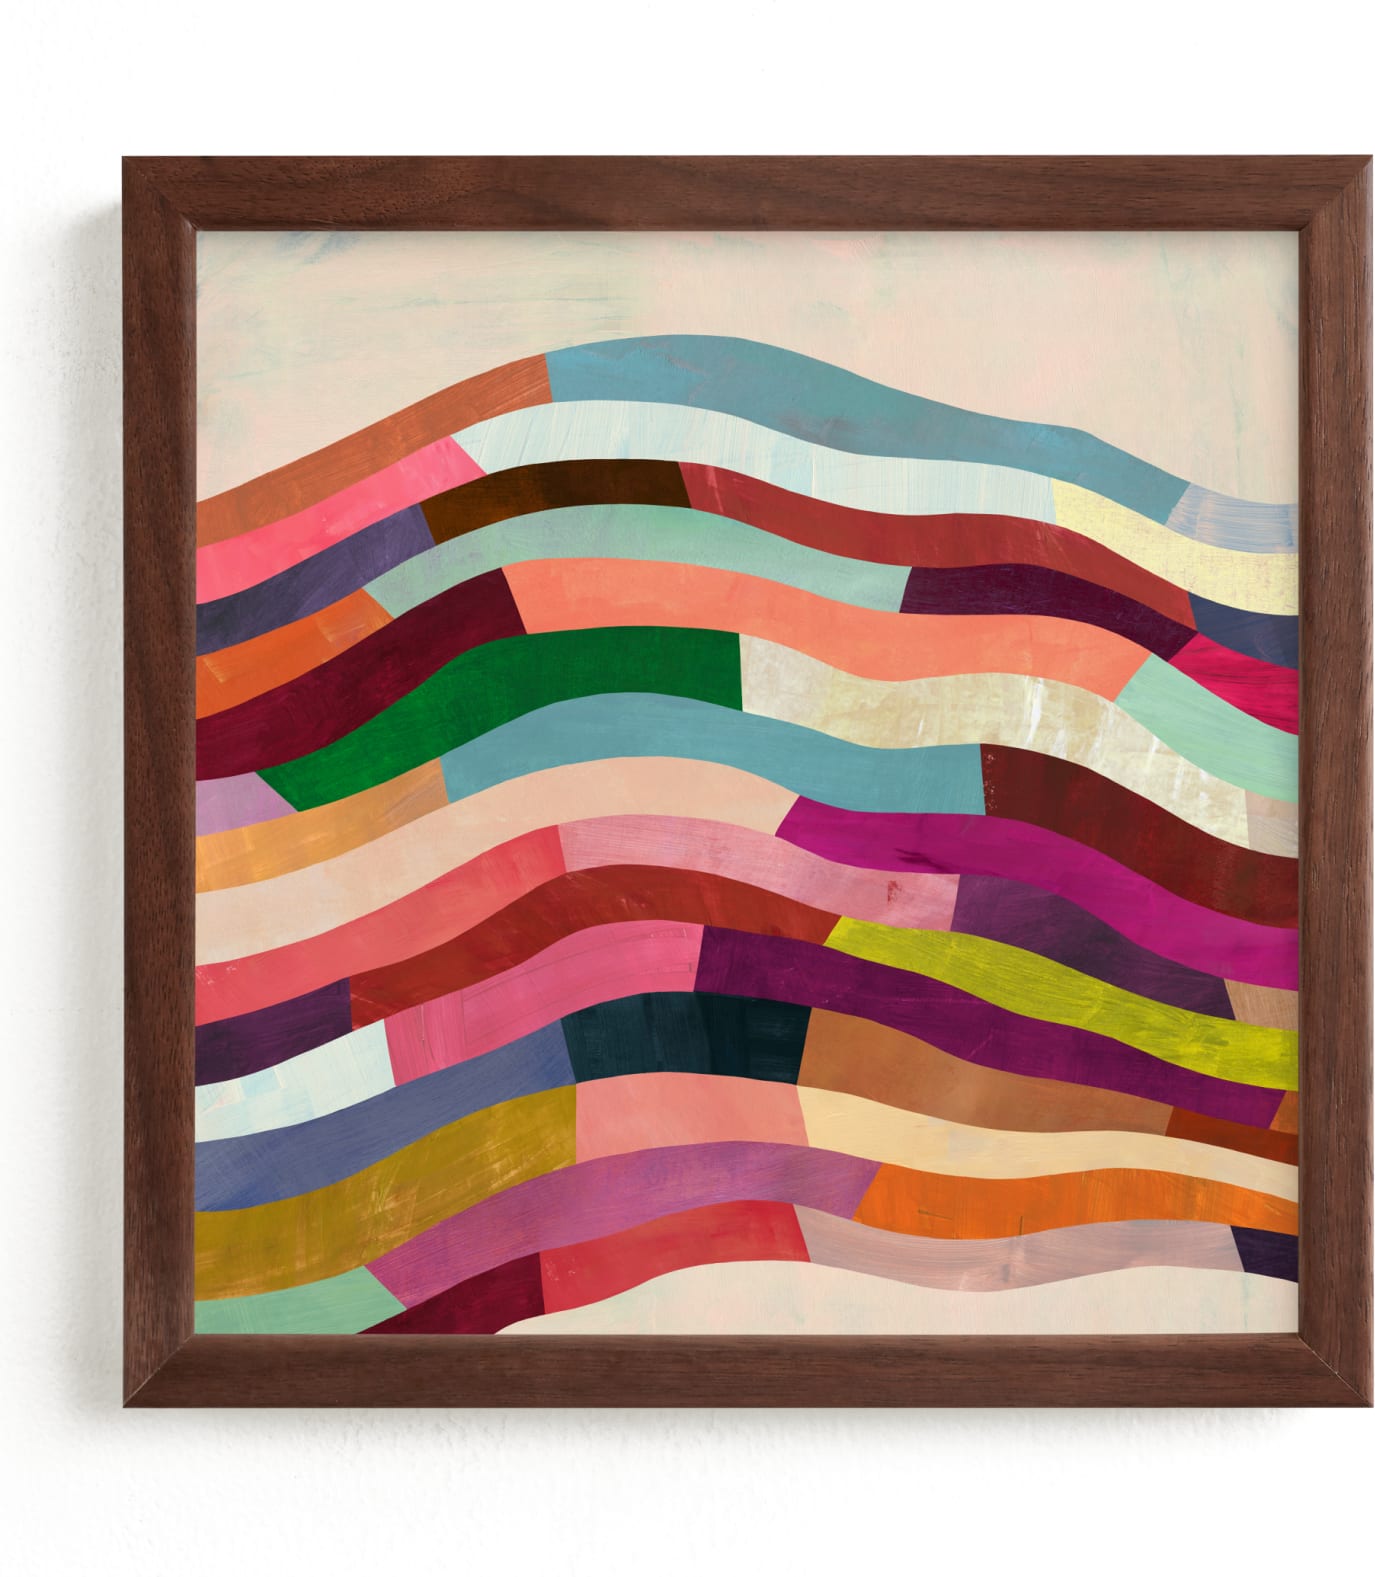 This is a ivory, colorful, pink art by melanie mikecz called Strata I.